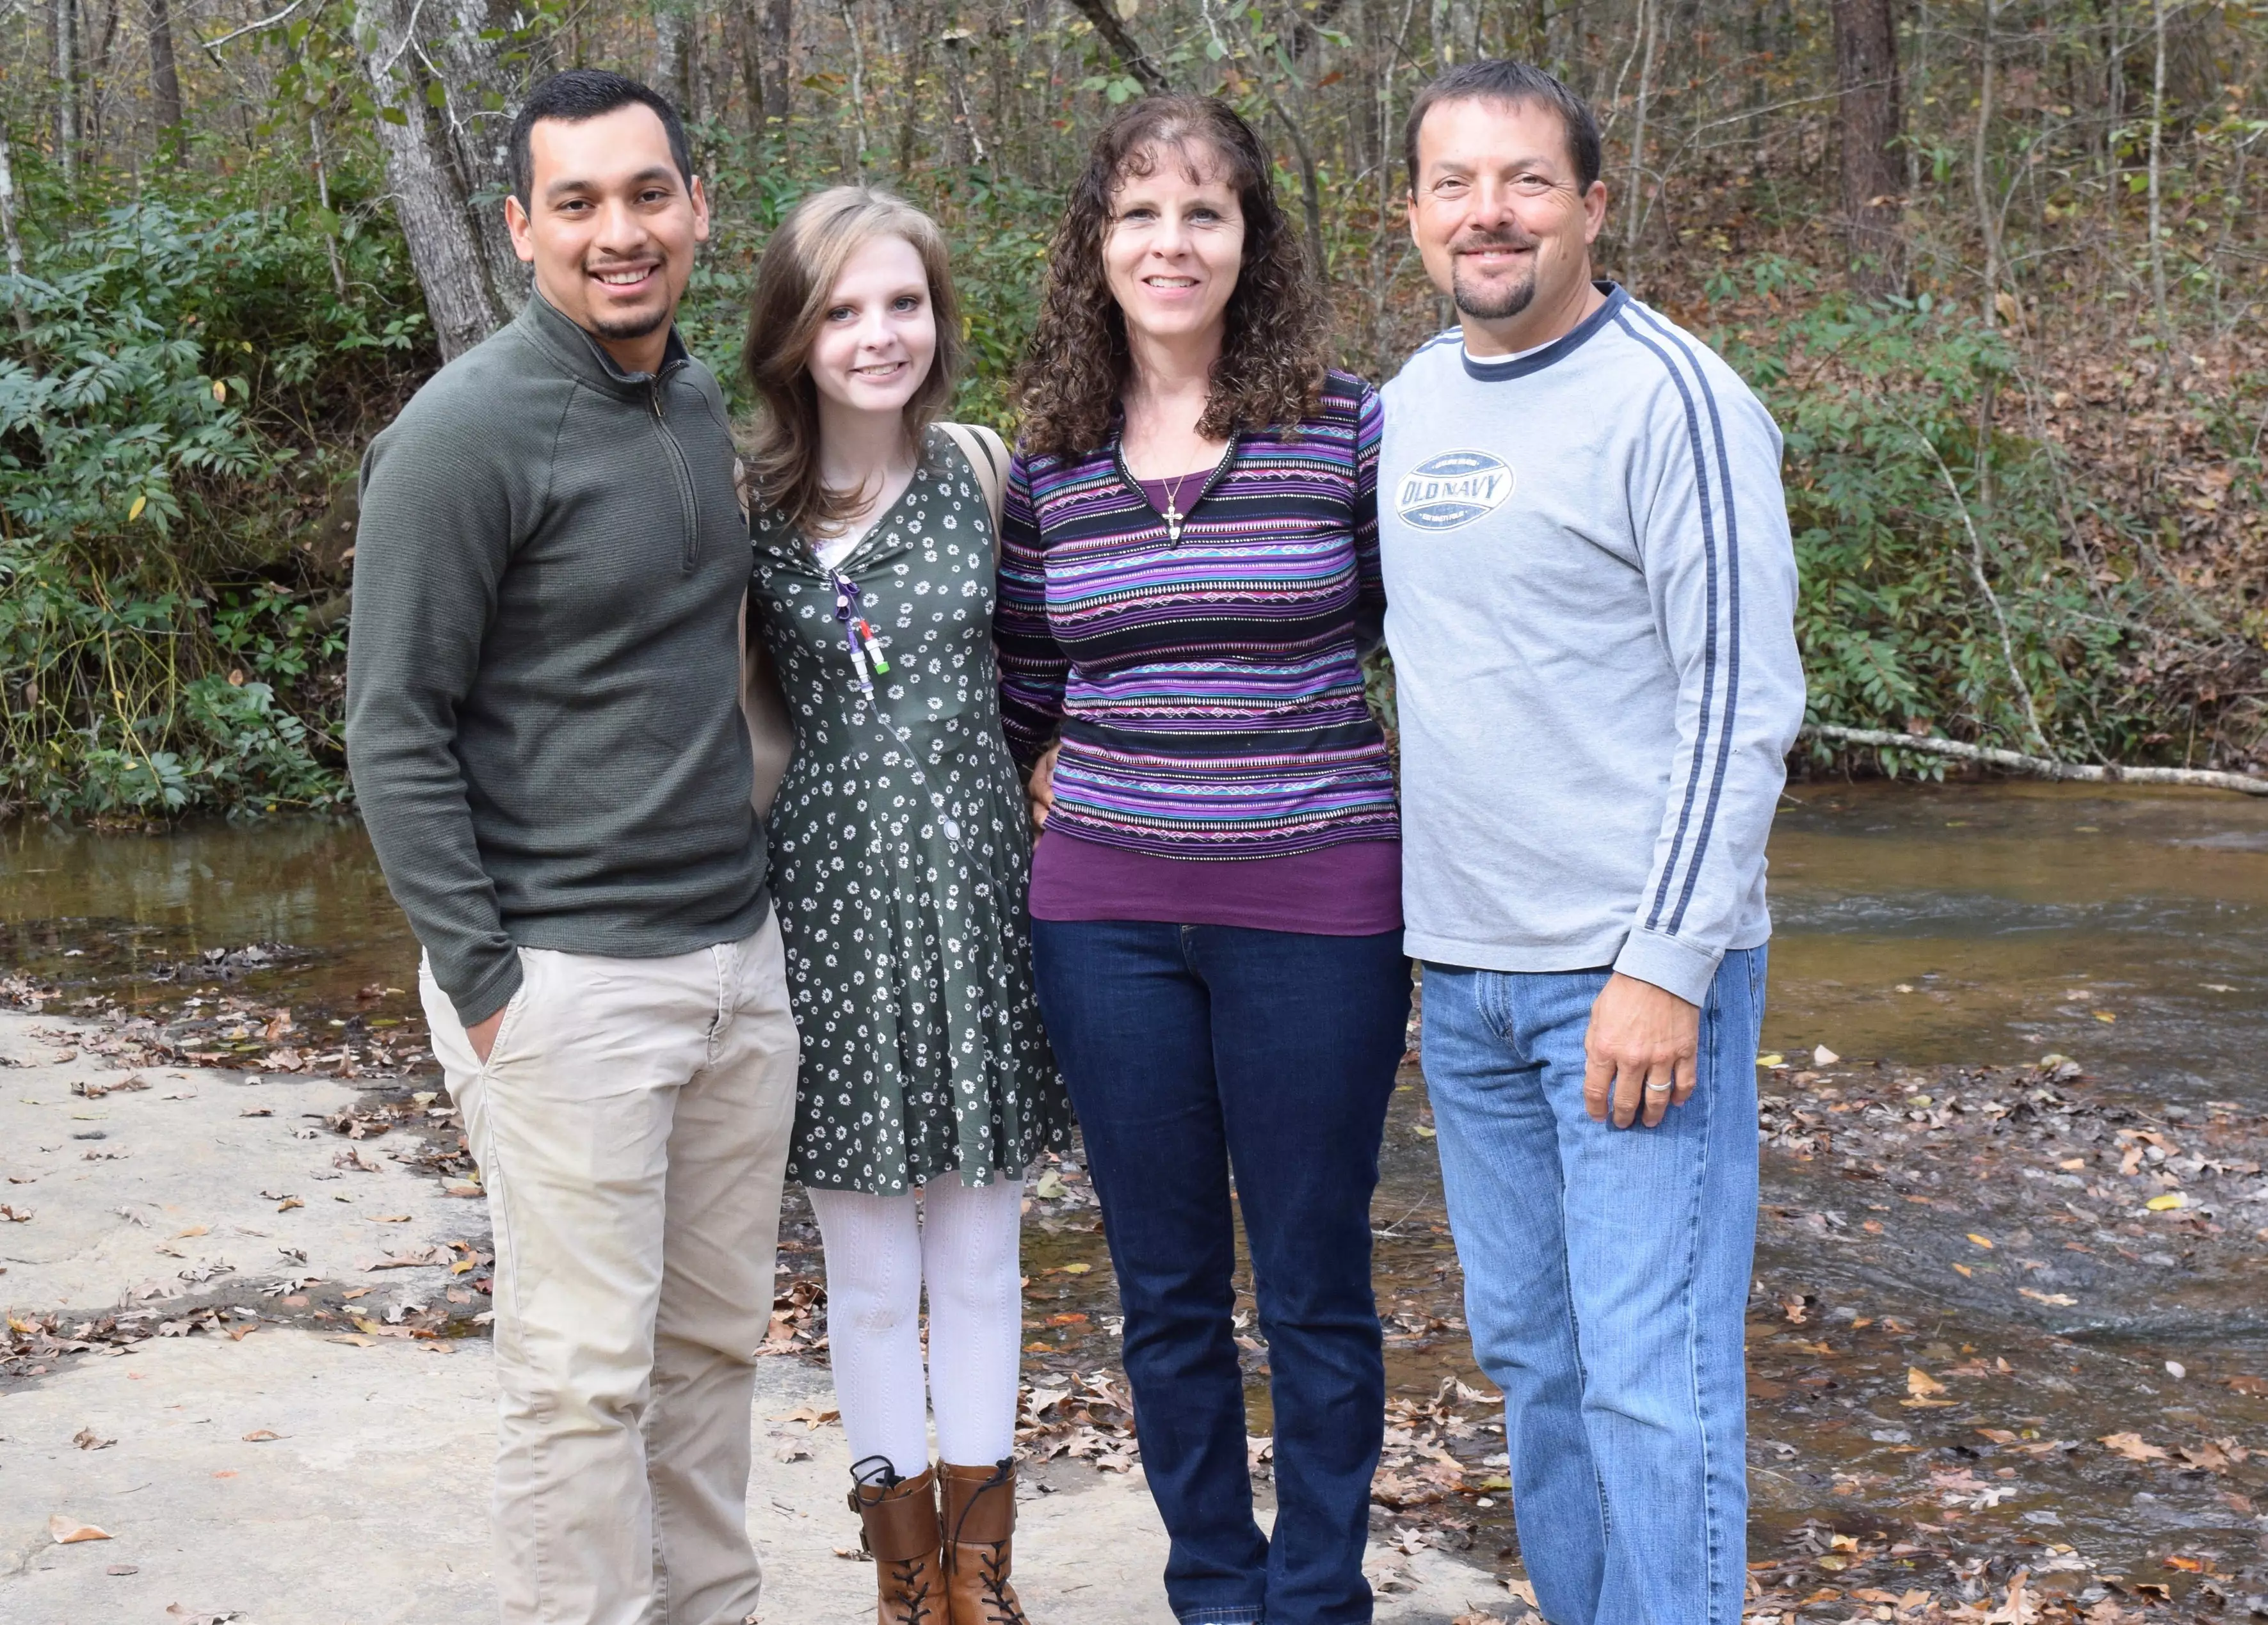 Cheyanne with her parents and fiance.